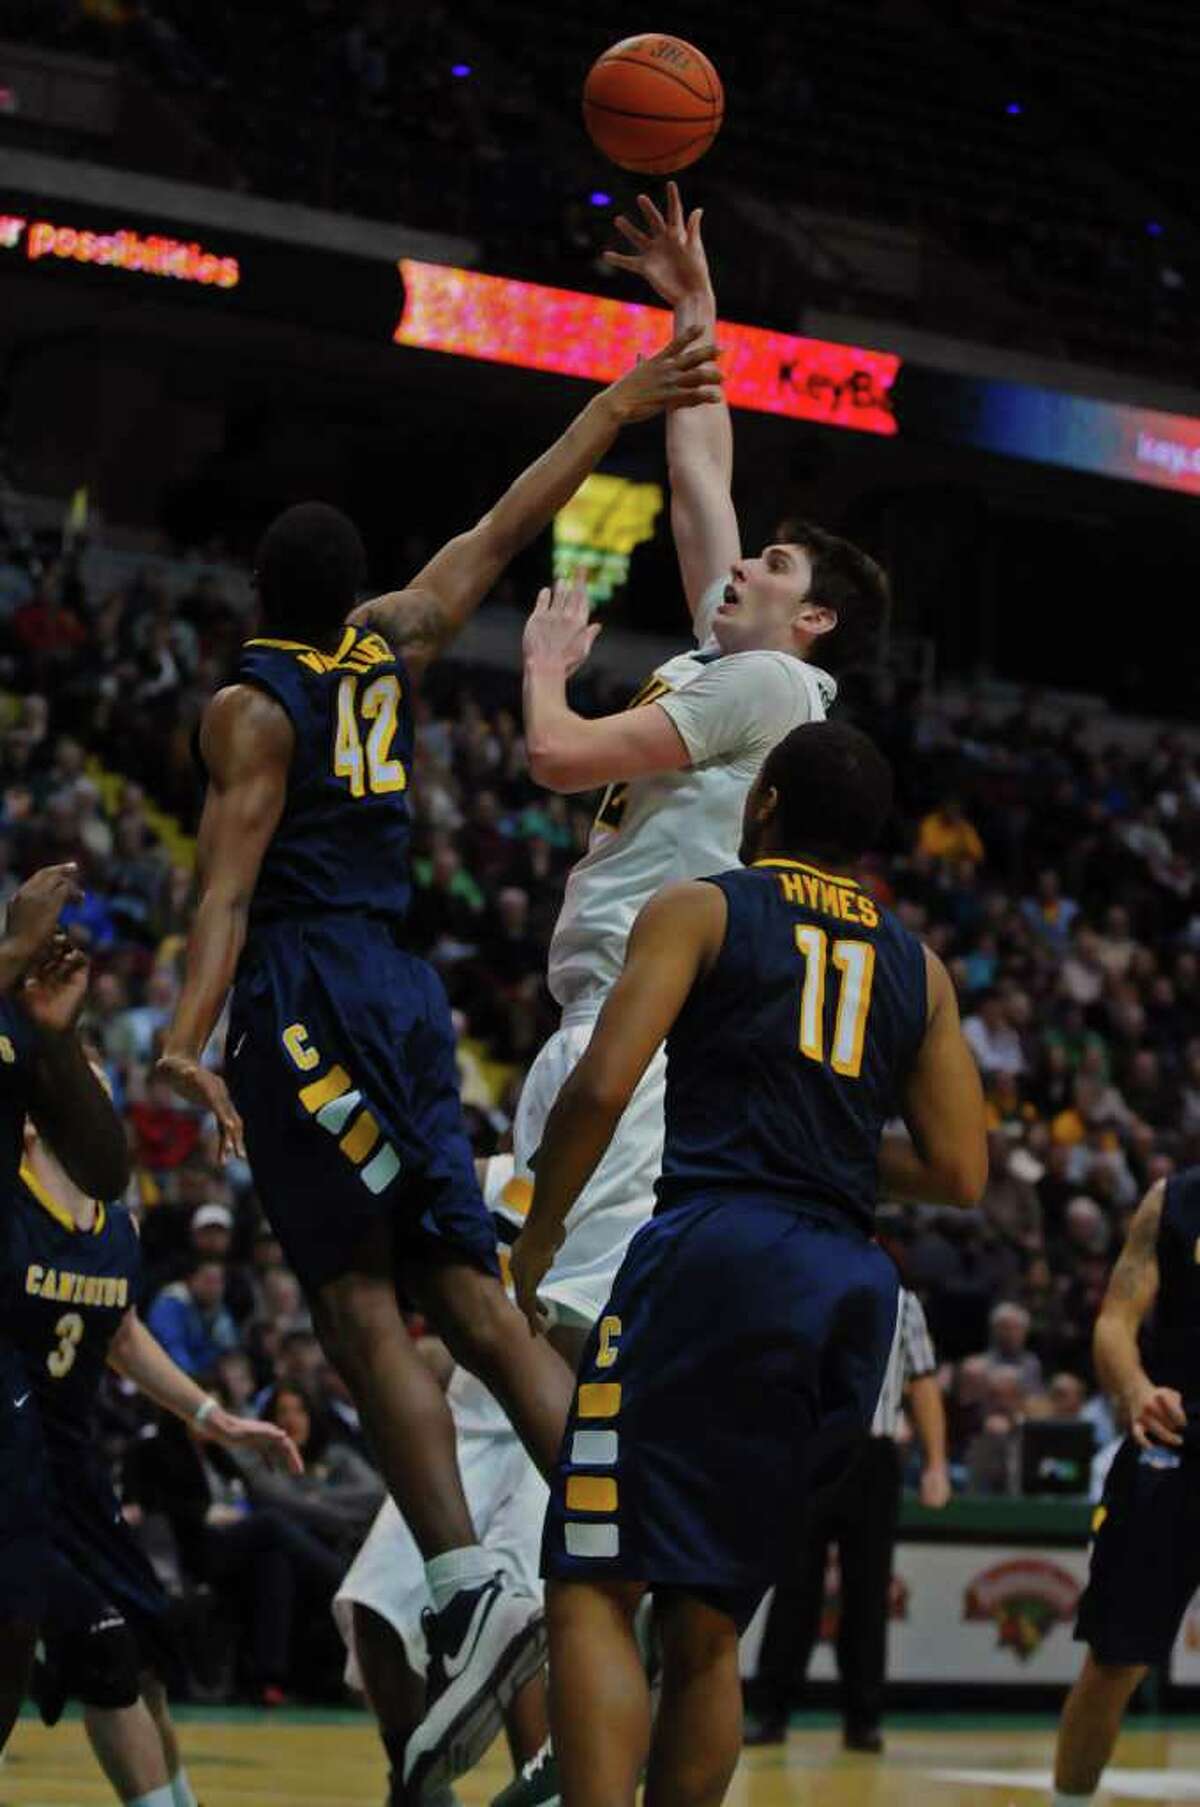 Siena's Ryan Rossiter puts up a shot over Canisius Tomas Vasquez-Simmons during the second half of Siena's 73-69 win over Canisius at the Times Union Center in Albany, NY on Monday night January 17, 2011. ( Philip Kamrass / Times Union )